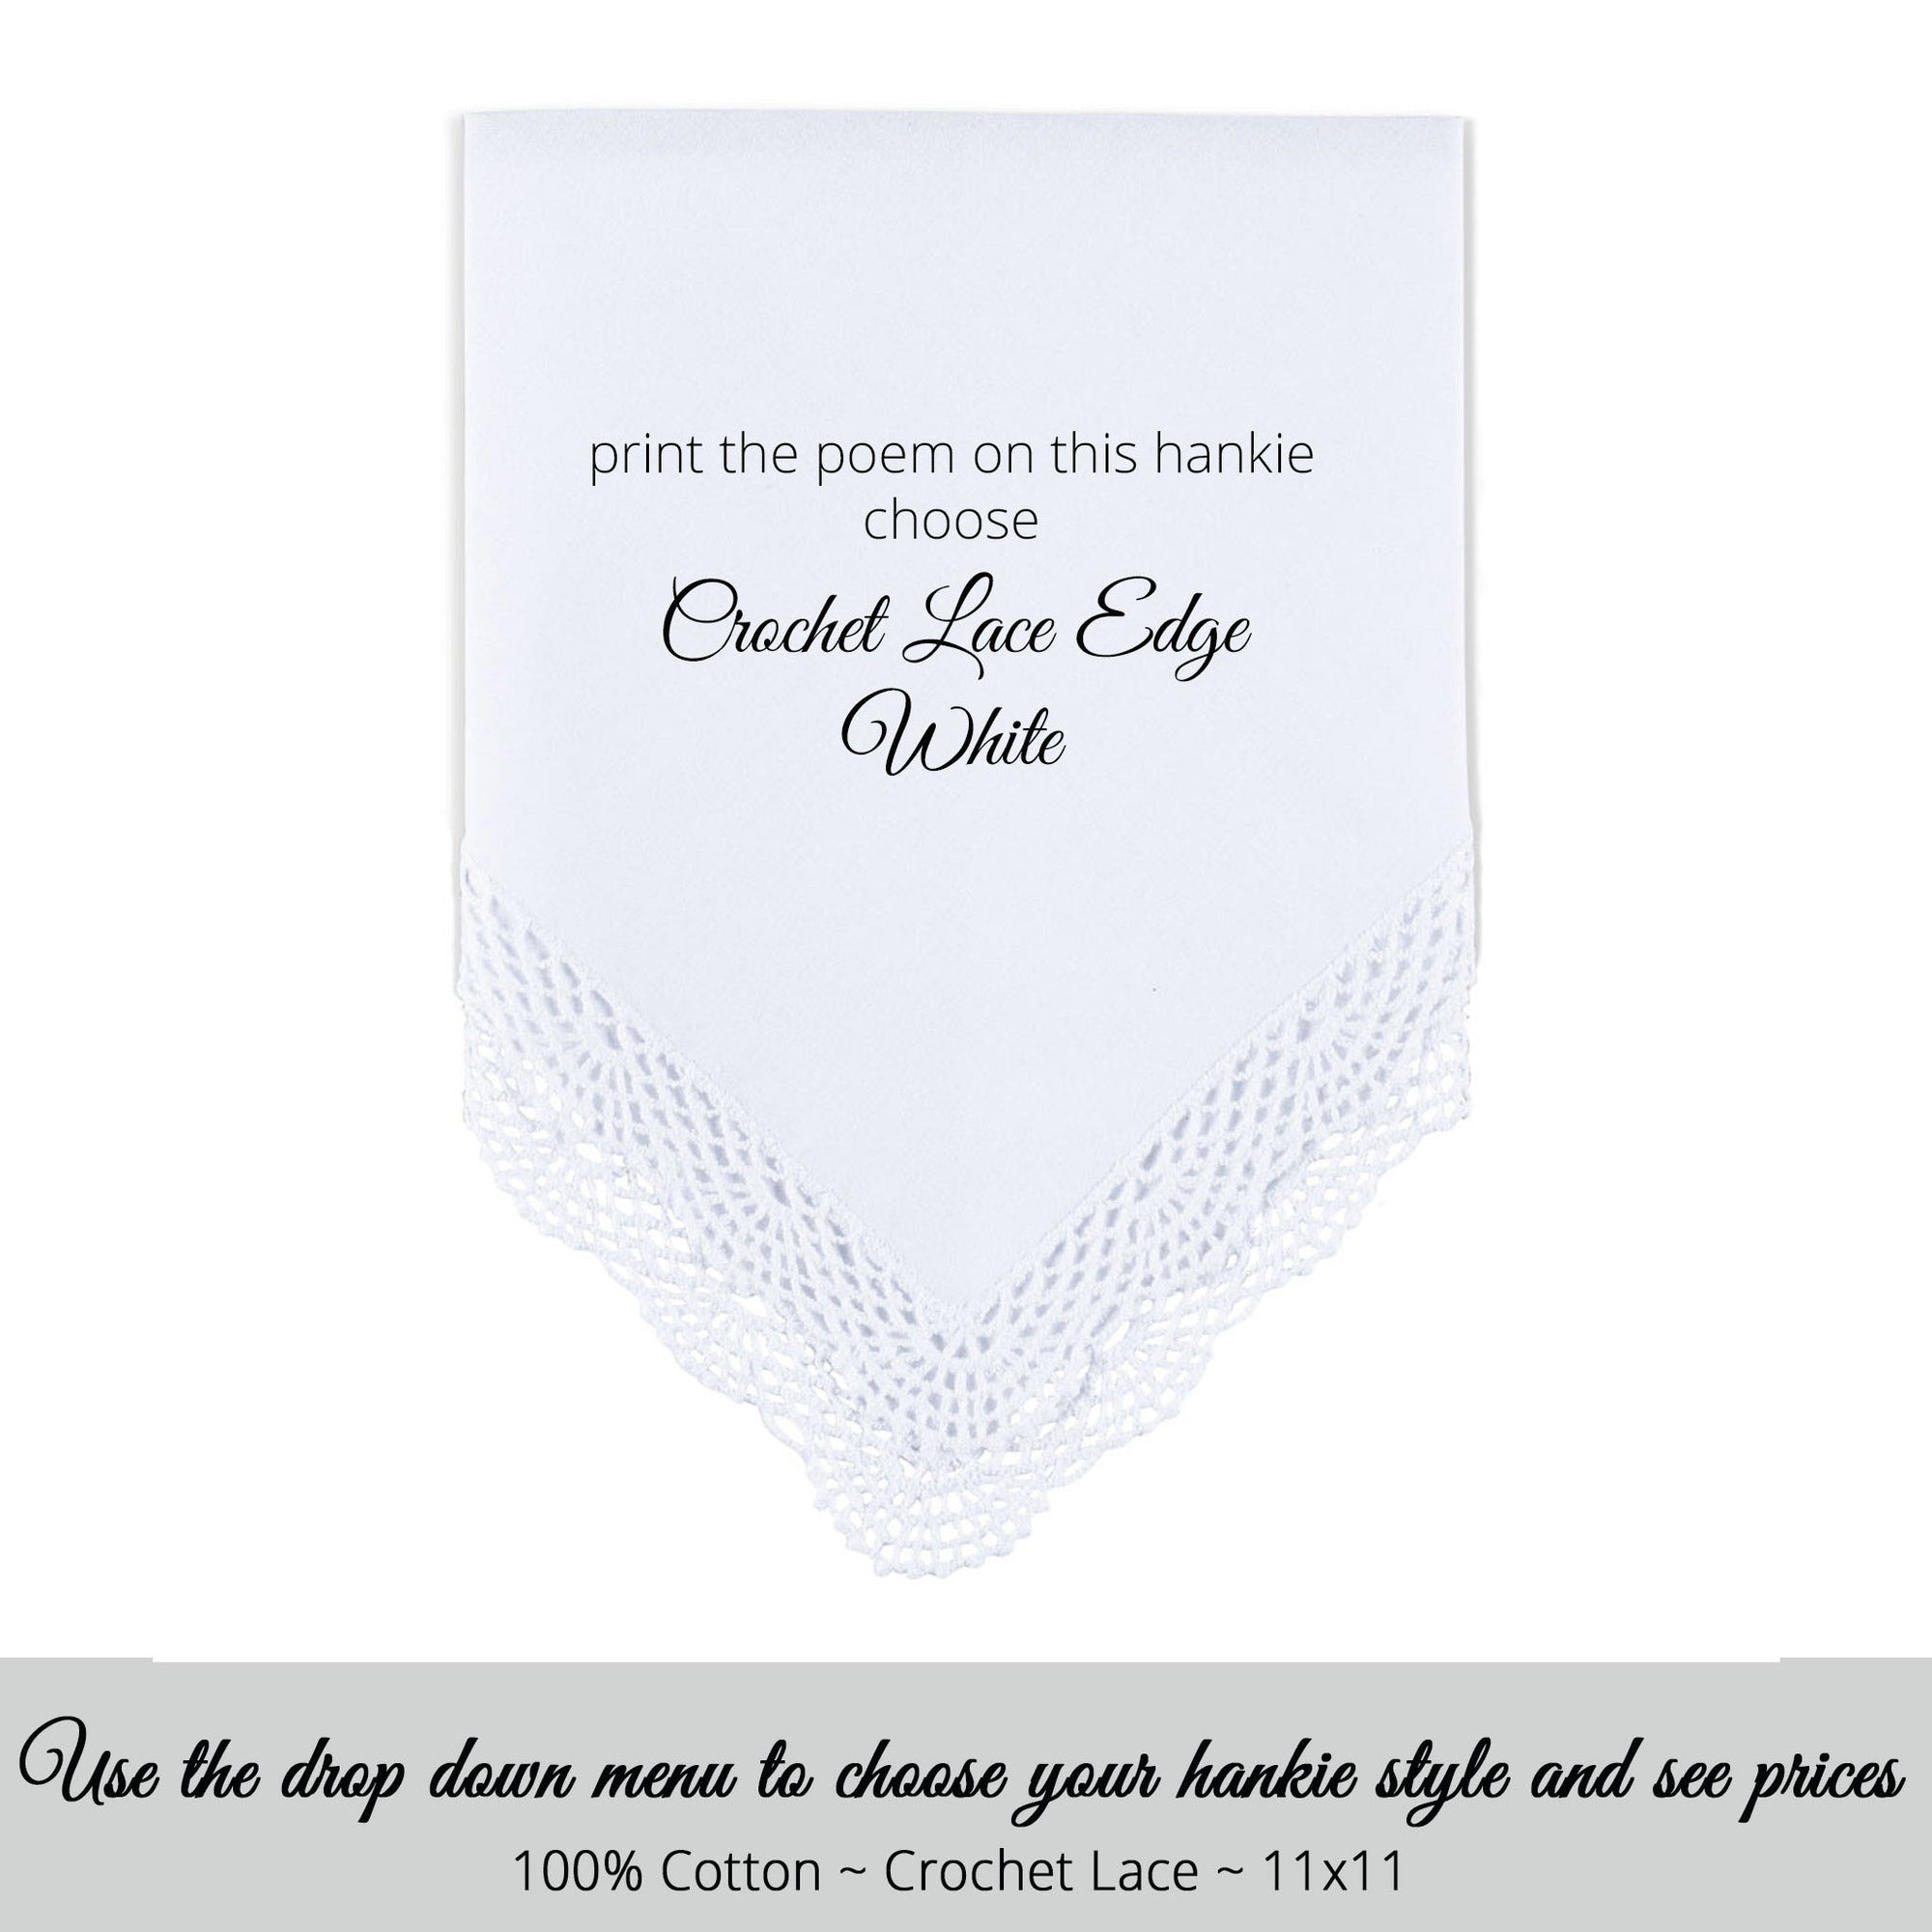 Crochet lace white personalized wedding handkerchief with poem for mother of the bride